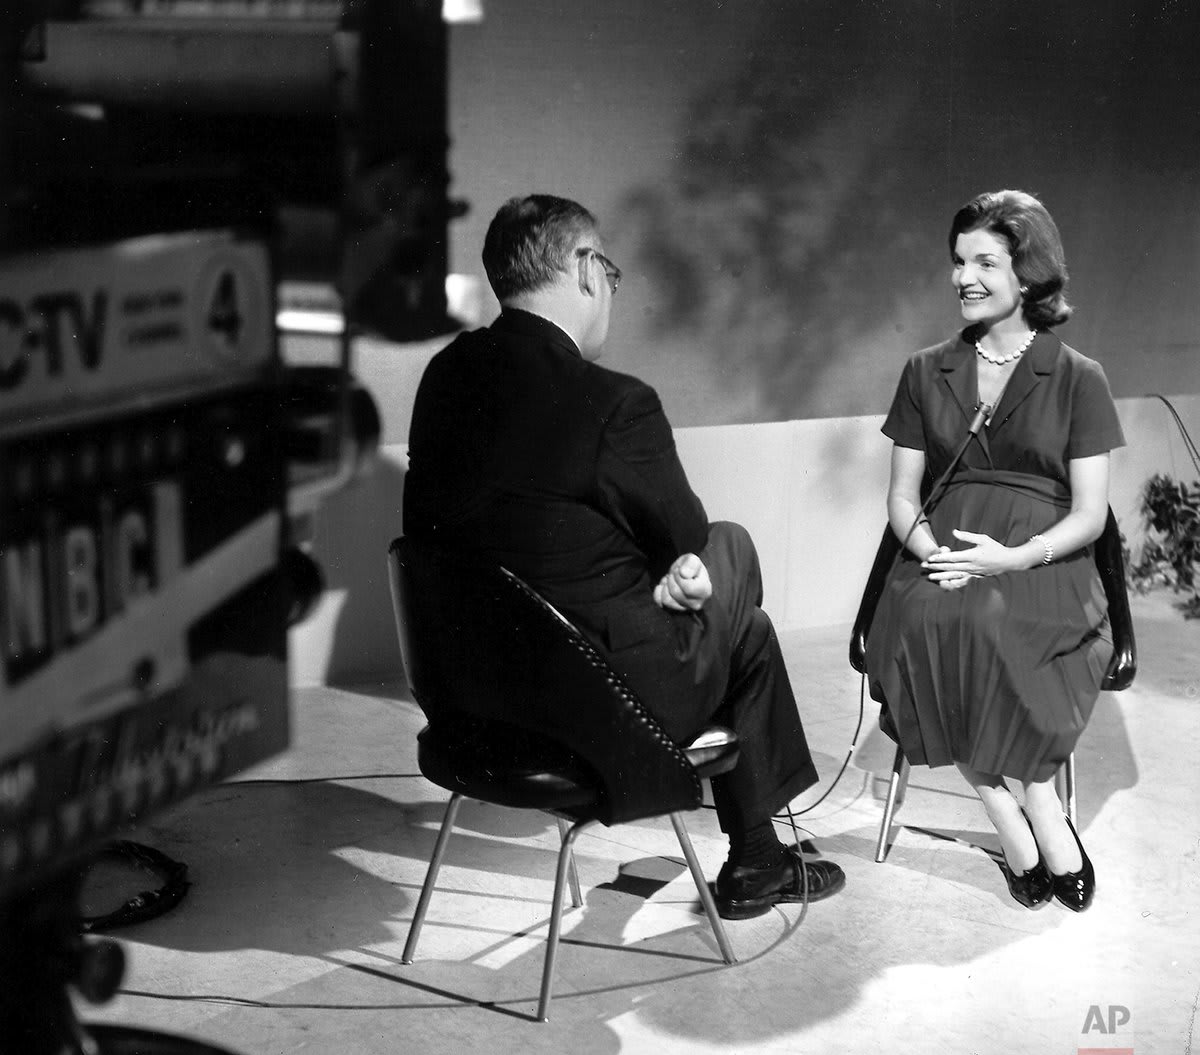 70 years ago today, NBC’s “Today” show premiered, with Dave Garroway as the host. Television host Dave Garroway interviews Jacqueline Kennedy, wife of Democratic Presidential candidate Sen. John F. Kennedy, during a taping of "Today" in New York on Sept. 13, 1960.